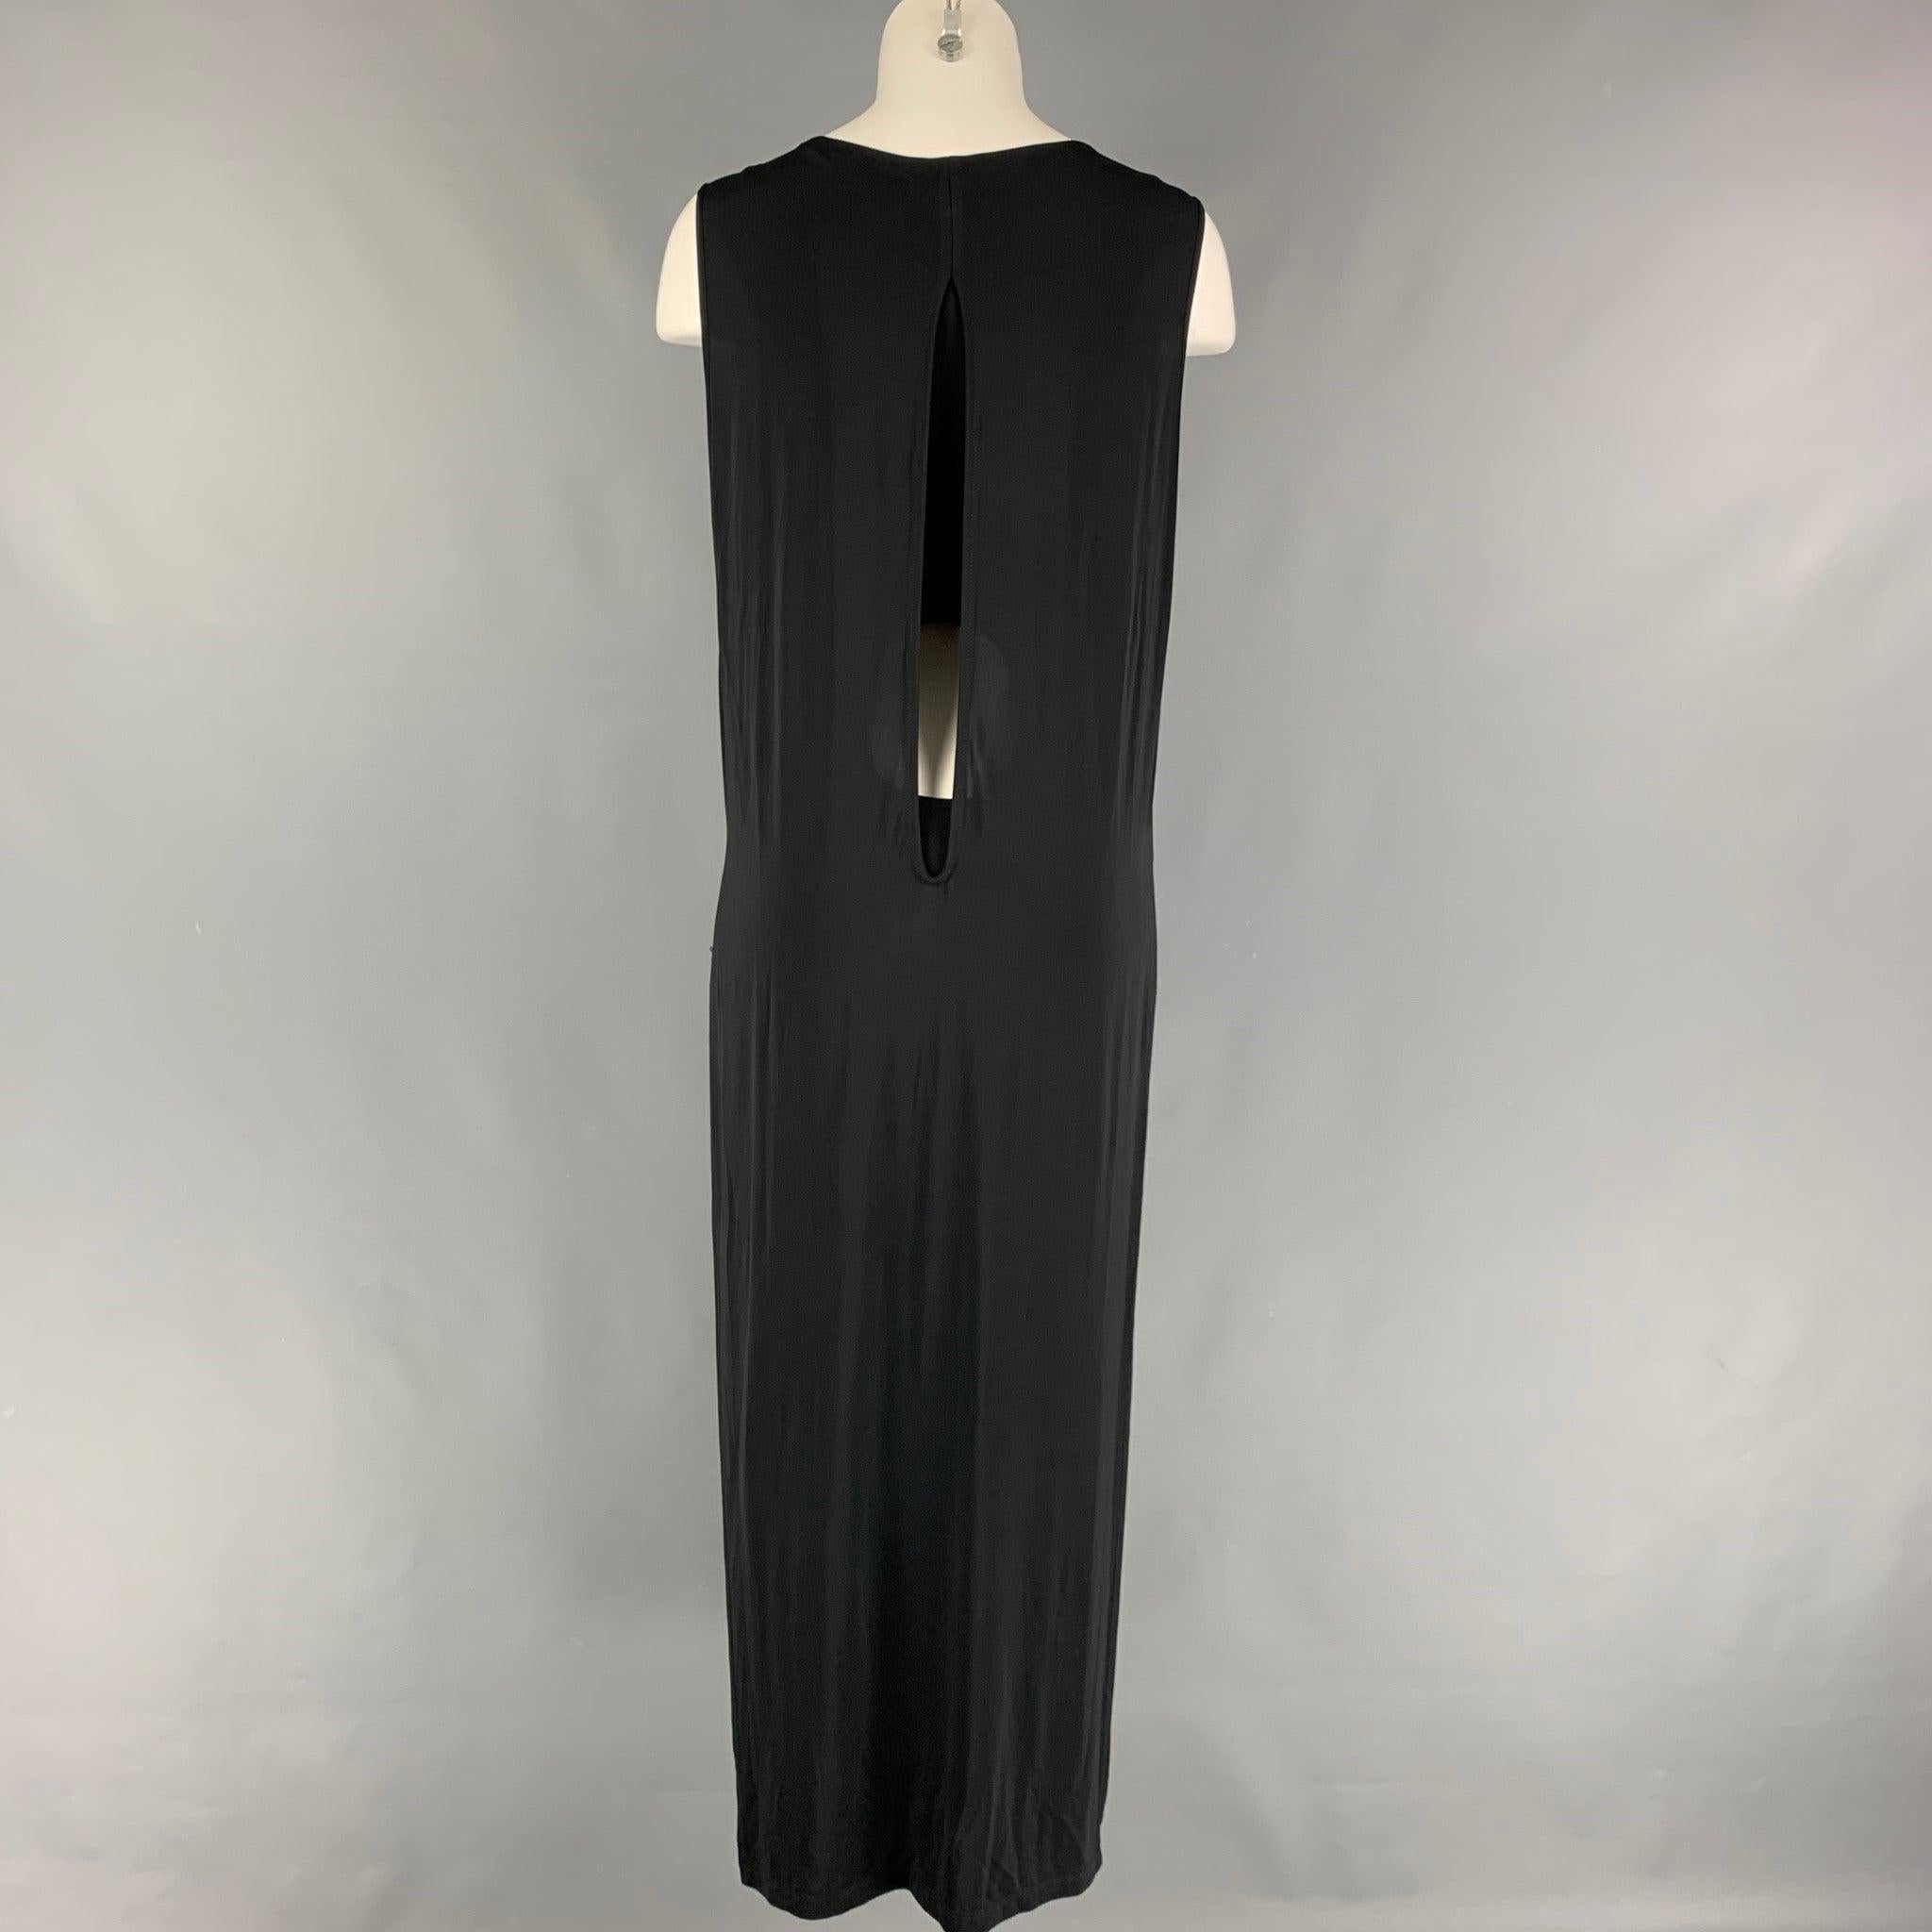 HELMUT LANG Size S Black High Slit Shift Dress In Excellent Condition For Sale In San Francisco, CA